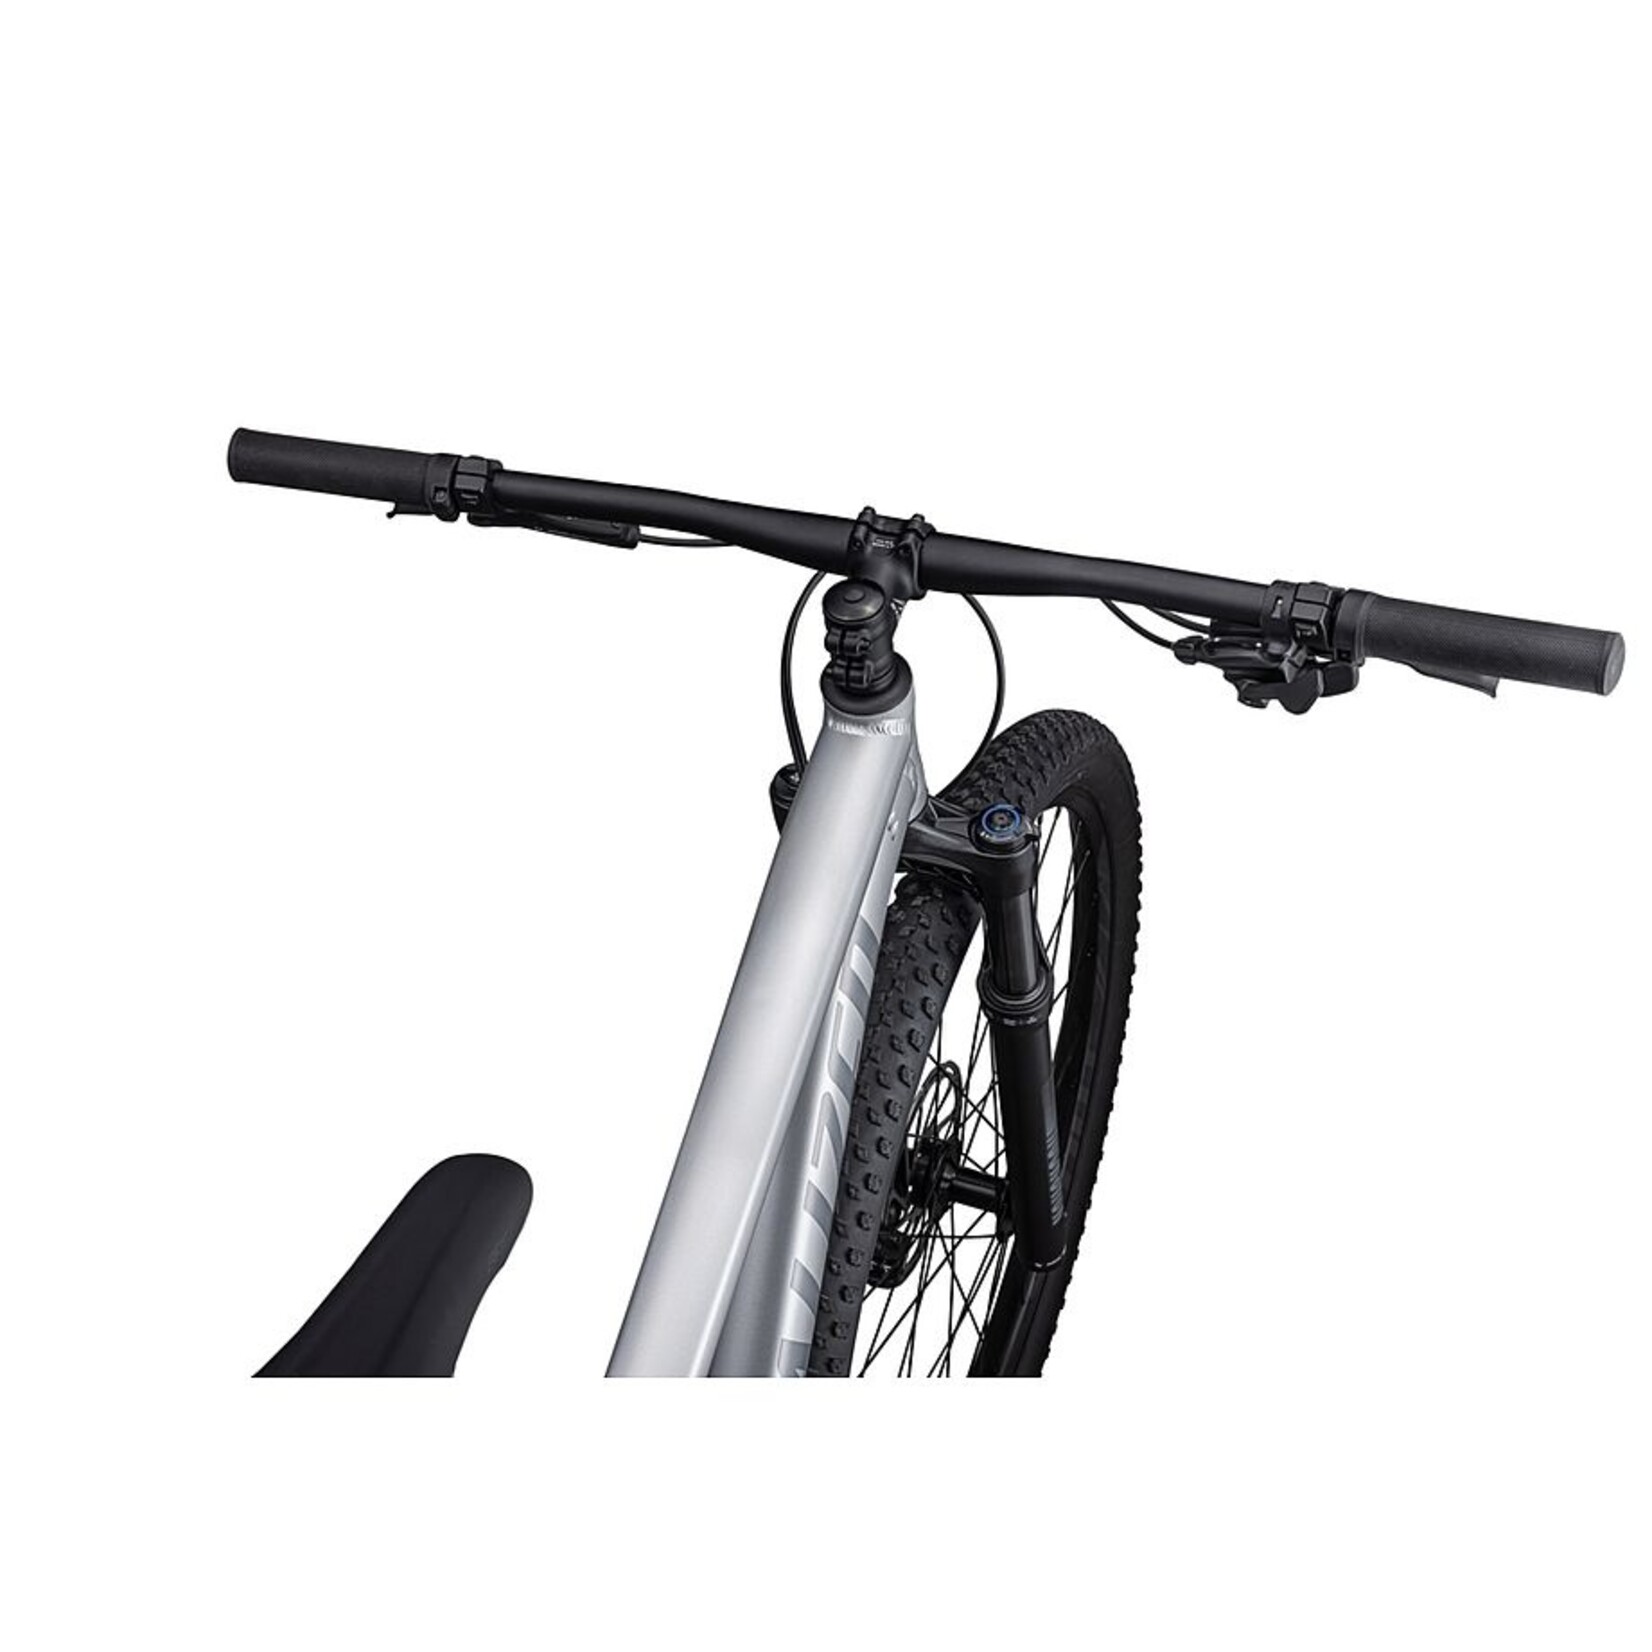 Specialized Rockhopper Expert 27.5 2023 in SATIN SILVER DUST  BLACK HOLOGRAPHIC